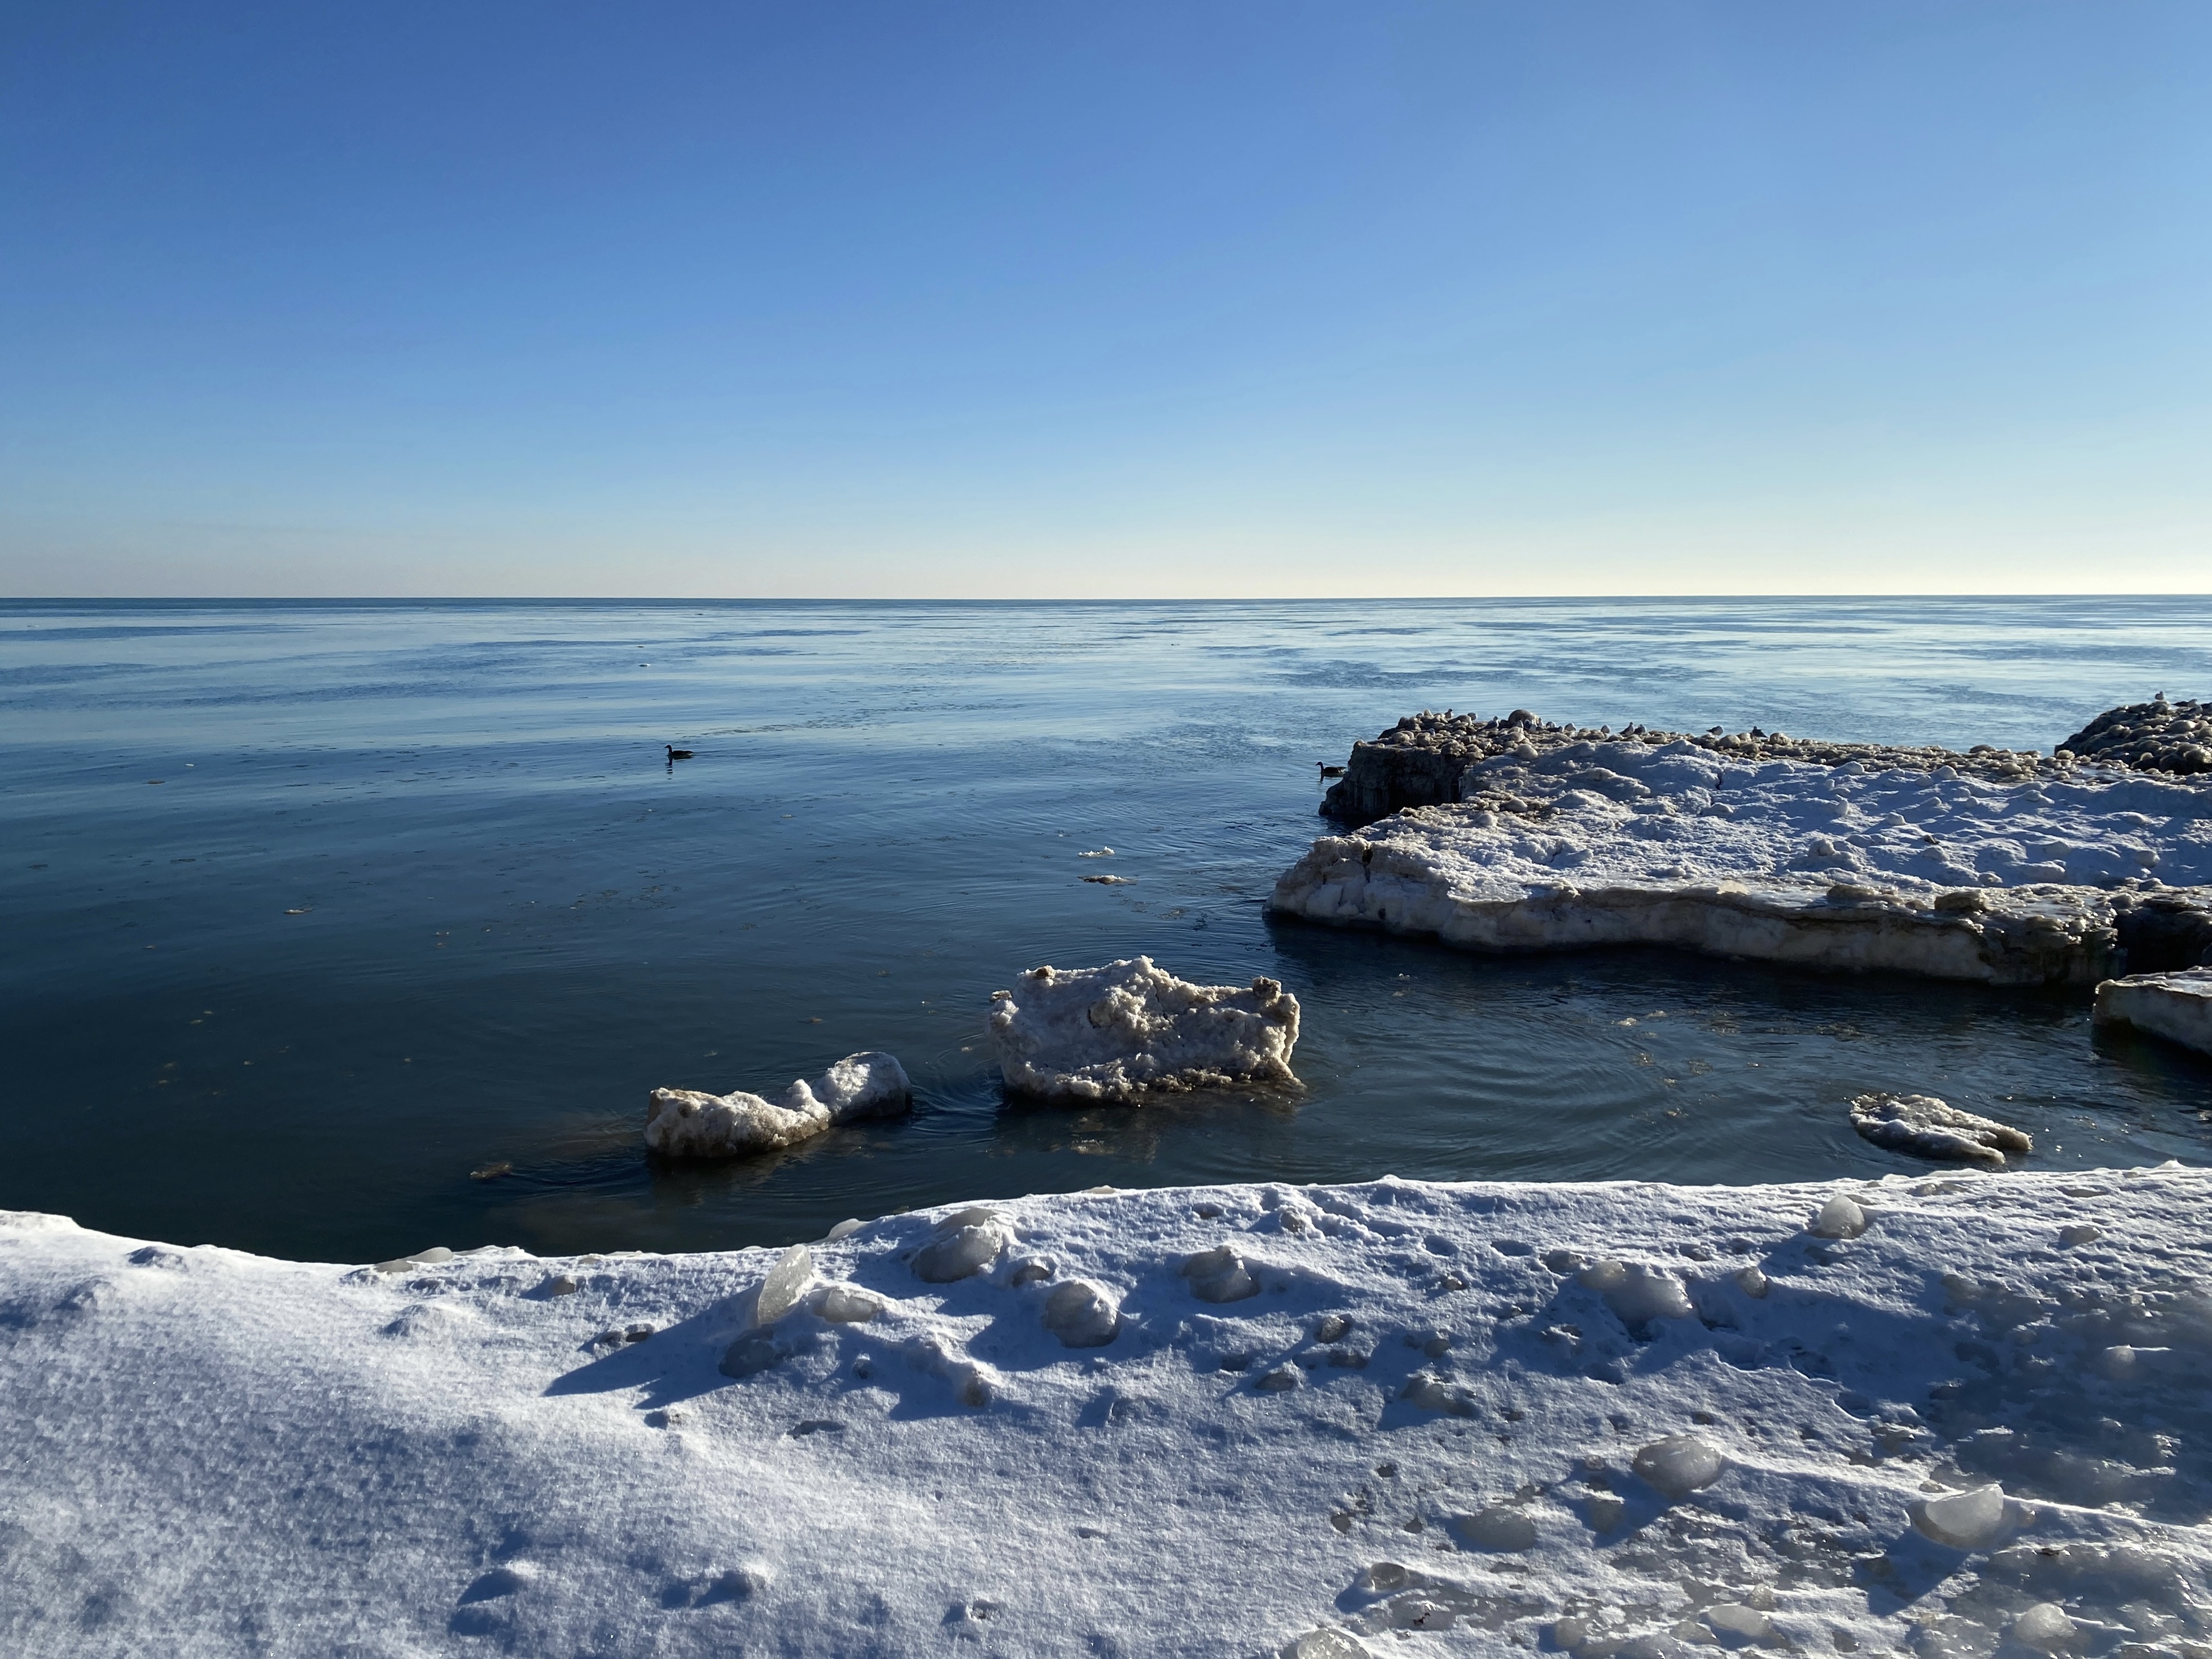 Horizon of large Lake Michigan with deep blue sky overhead and floes of ice in the foreground